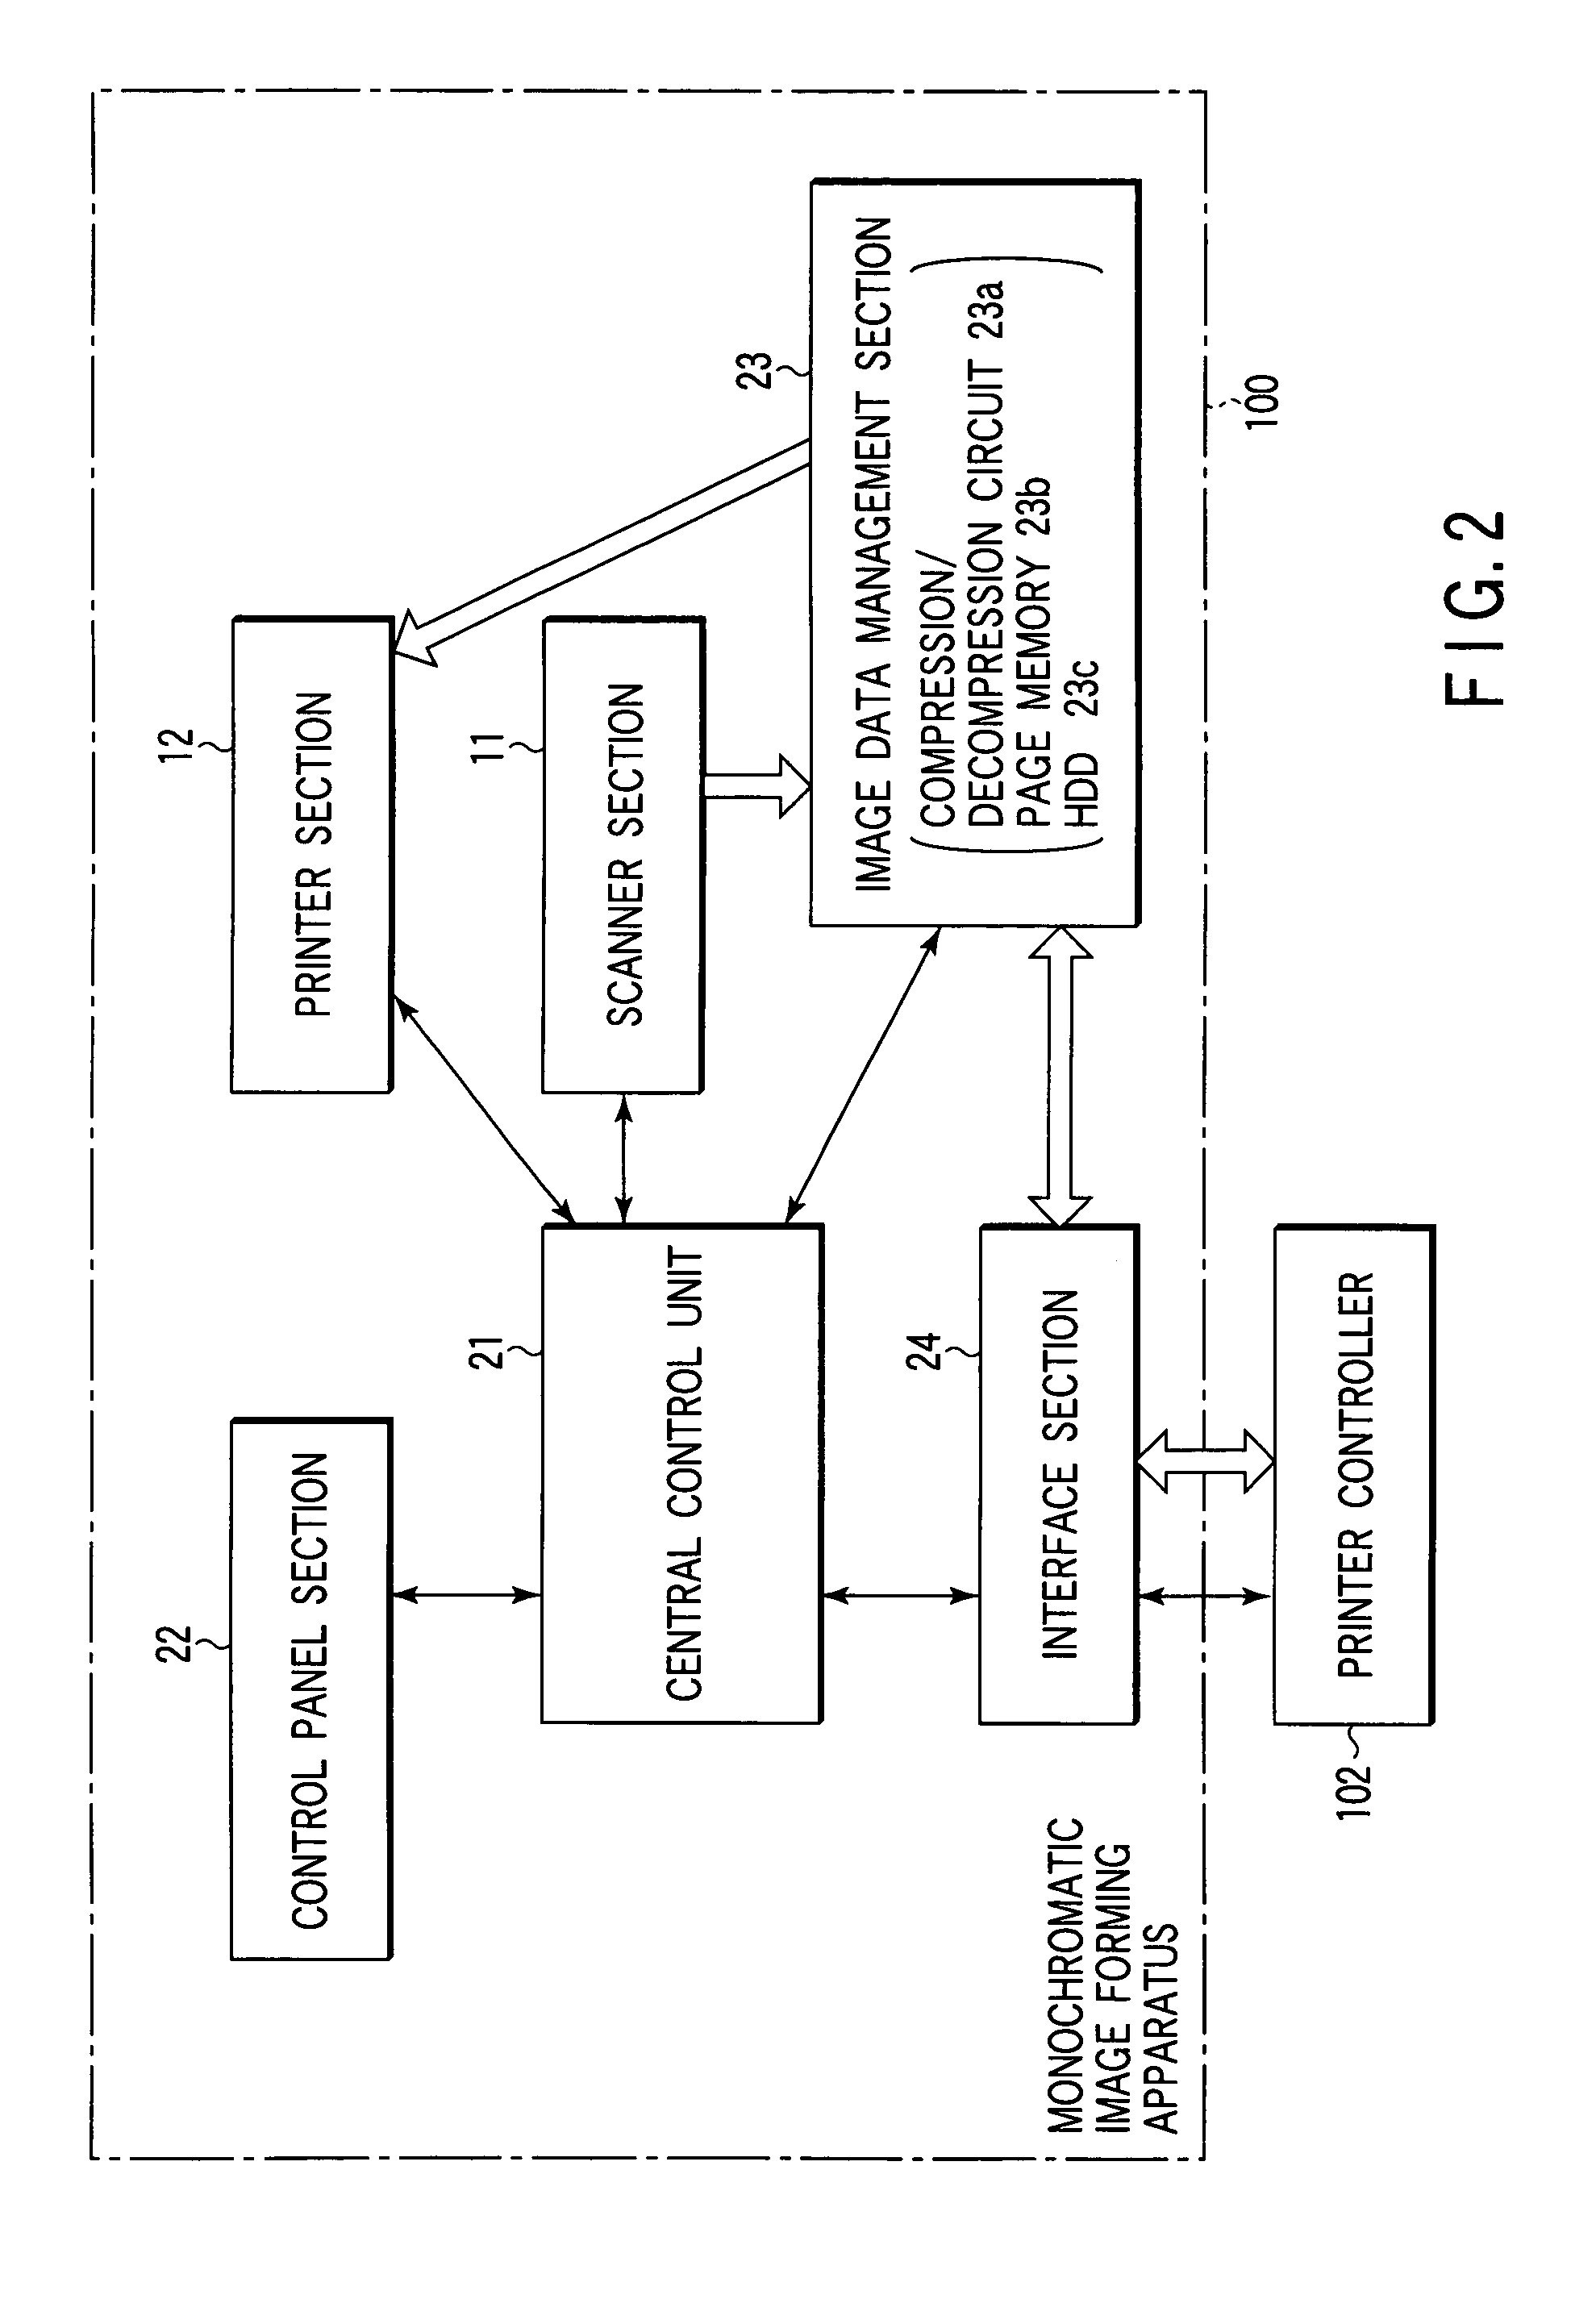 Image output method and system for distributing image output